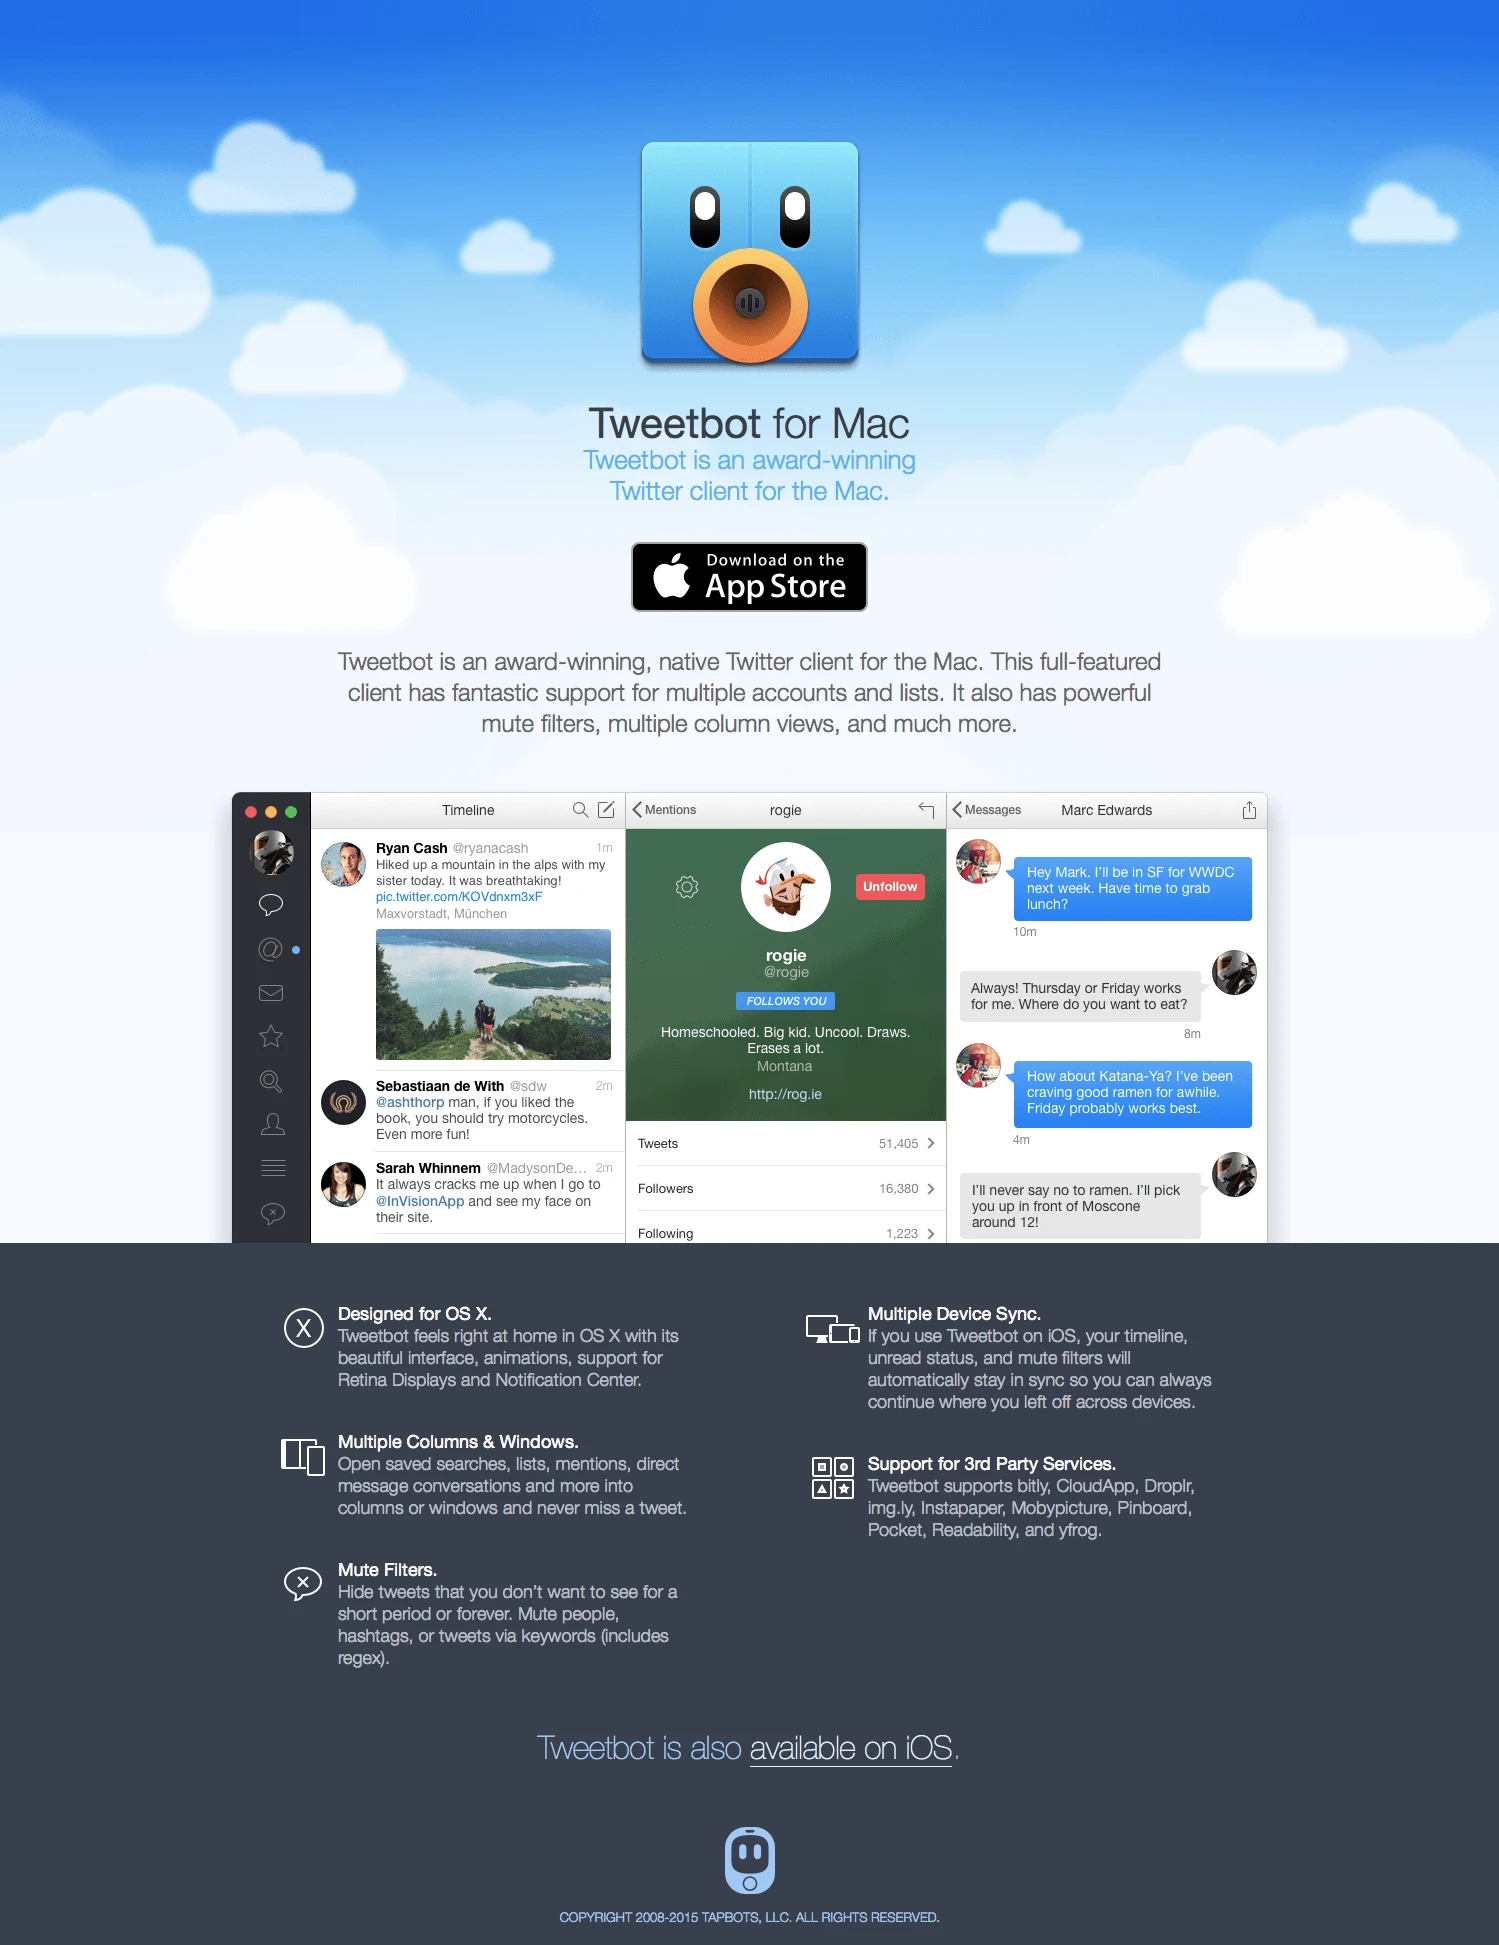 Tweetbot for Mac Landing Page Example: Tweetbot is an award-winning, native Twitter client for the Mac. This full-featured client has fantastic support for multiple accounts and lists. It also has powerful mute filters, multiple column views, and much more.